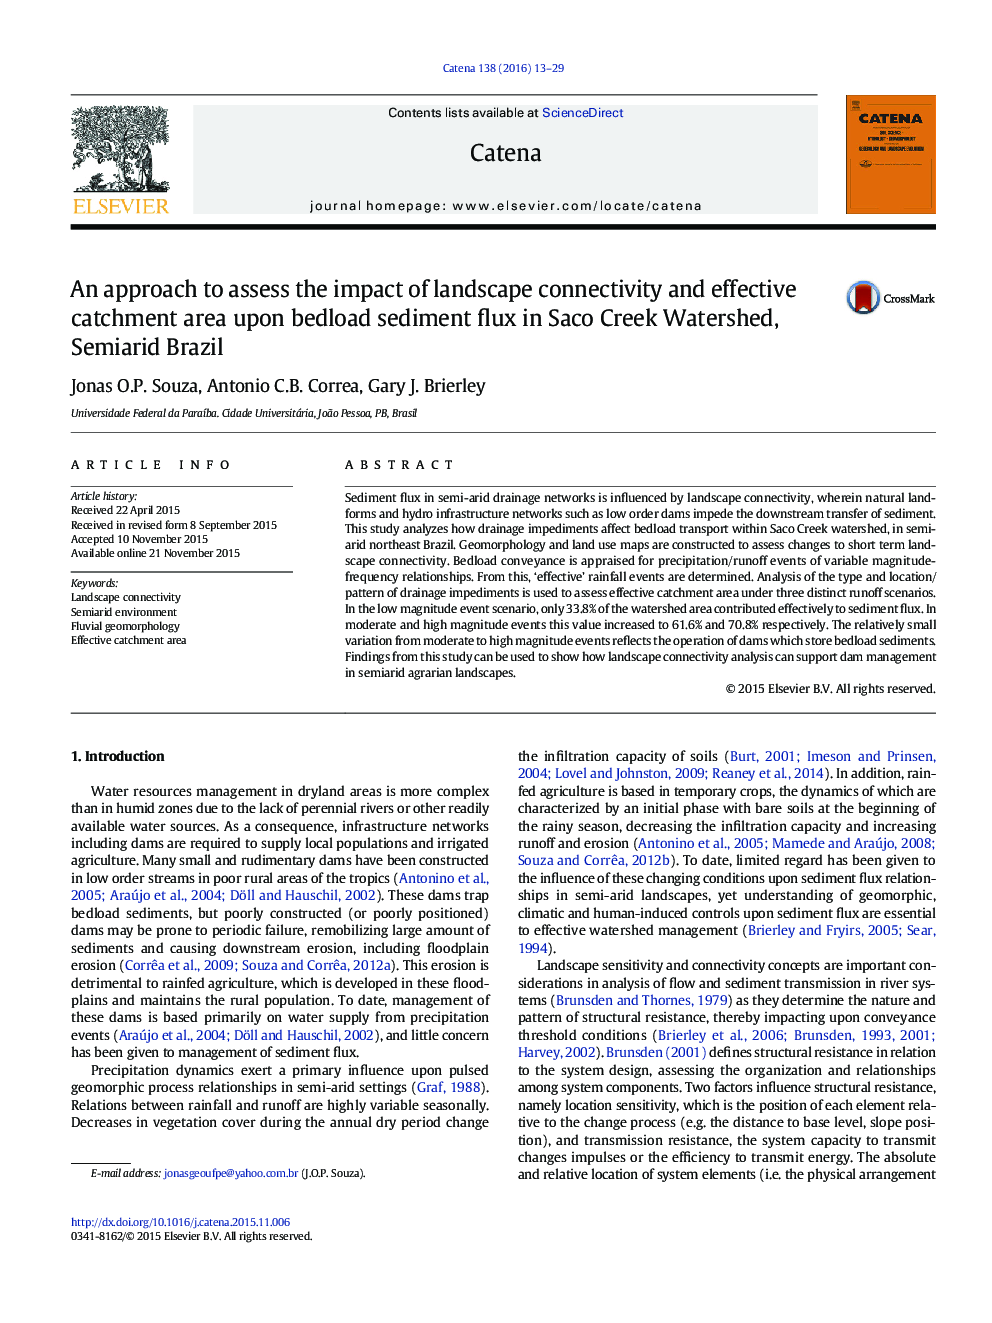 An approach to assess the impact of landscape connectivity and effective catchment area upon bedload sediment flux in Saco Creek Watershed, Semiarid Brazil